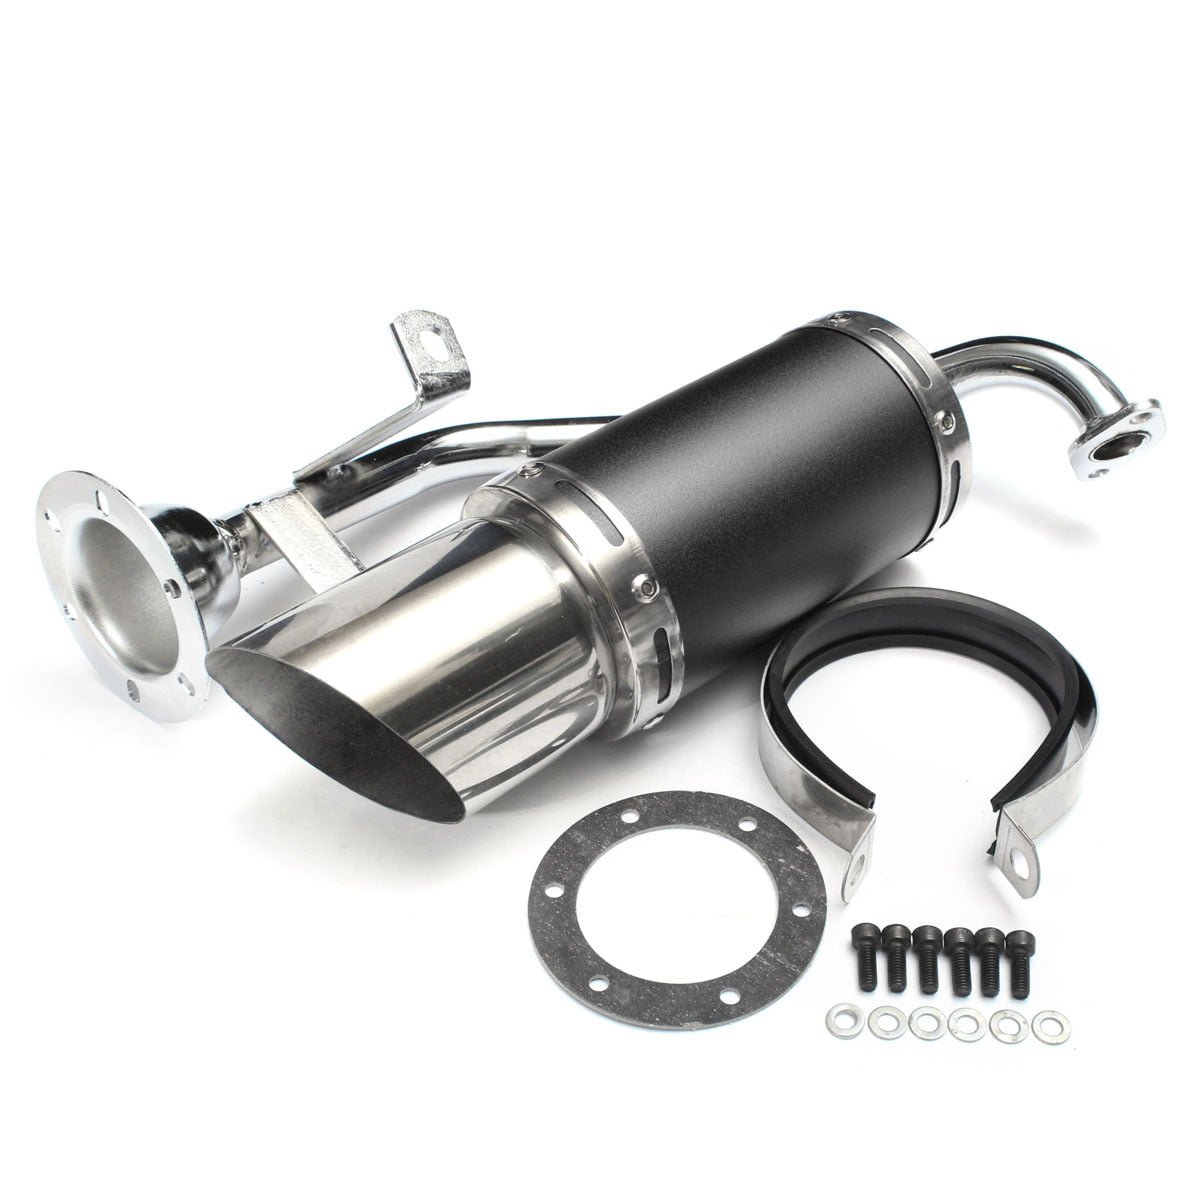 Scooter Performance Exhaust With Black Muffler 50cc Scooter-ATV Parts 